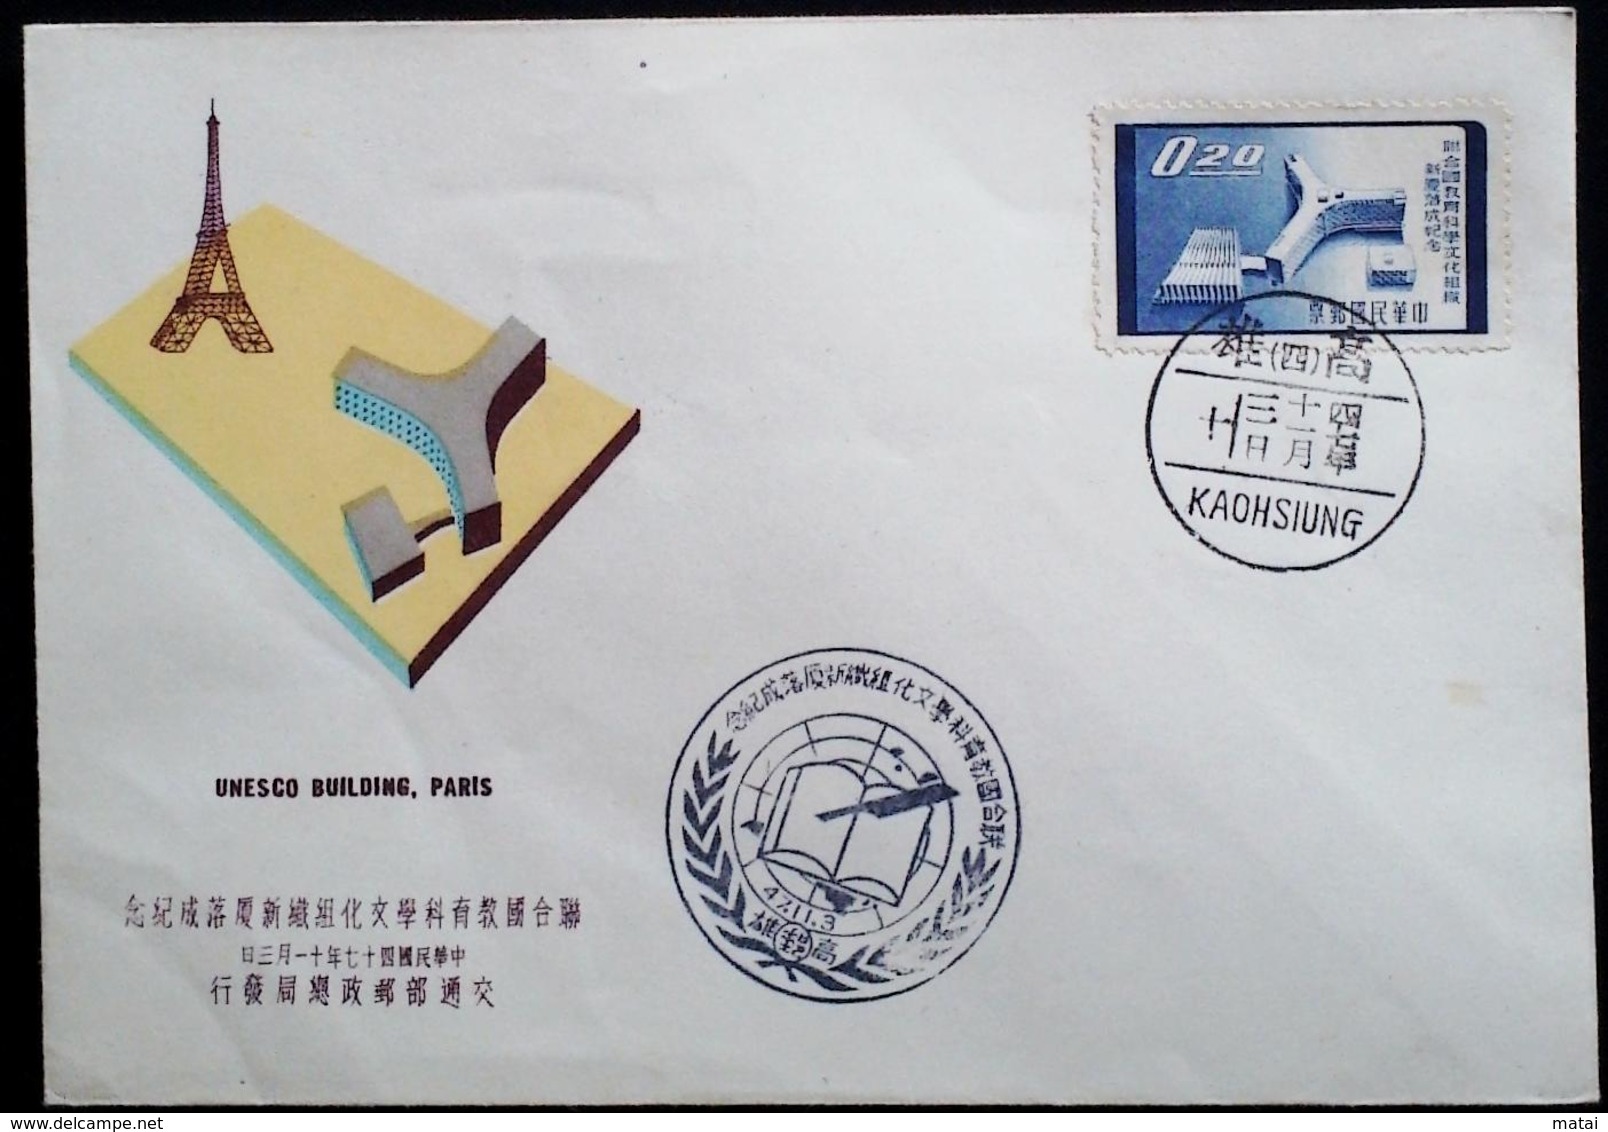 CHINA CHINE CINA 1958 TAIWAN (FORMOSA) F.D.C. COVER - Storia Postale